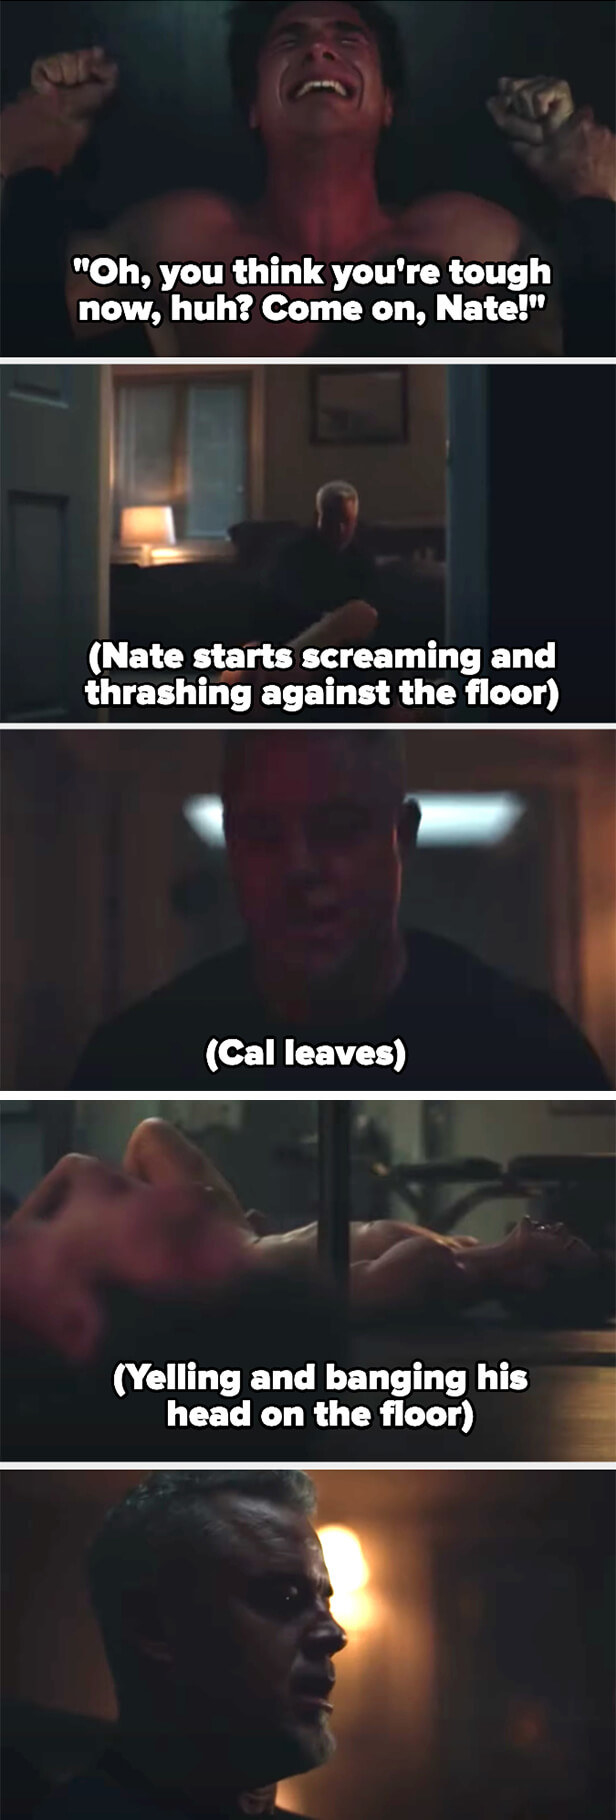 Cal says &quot;Oh, you think you&#x27;re tough now? Come on, Nate!&quot; and Nate starts screaming and banging his head against the floor as Cal walks away